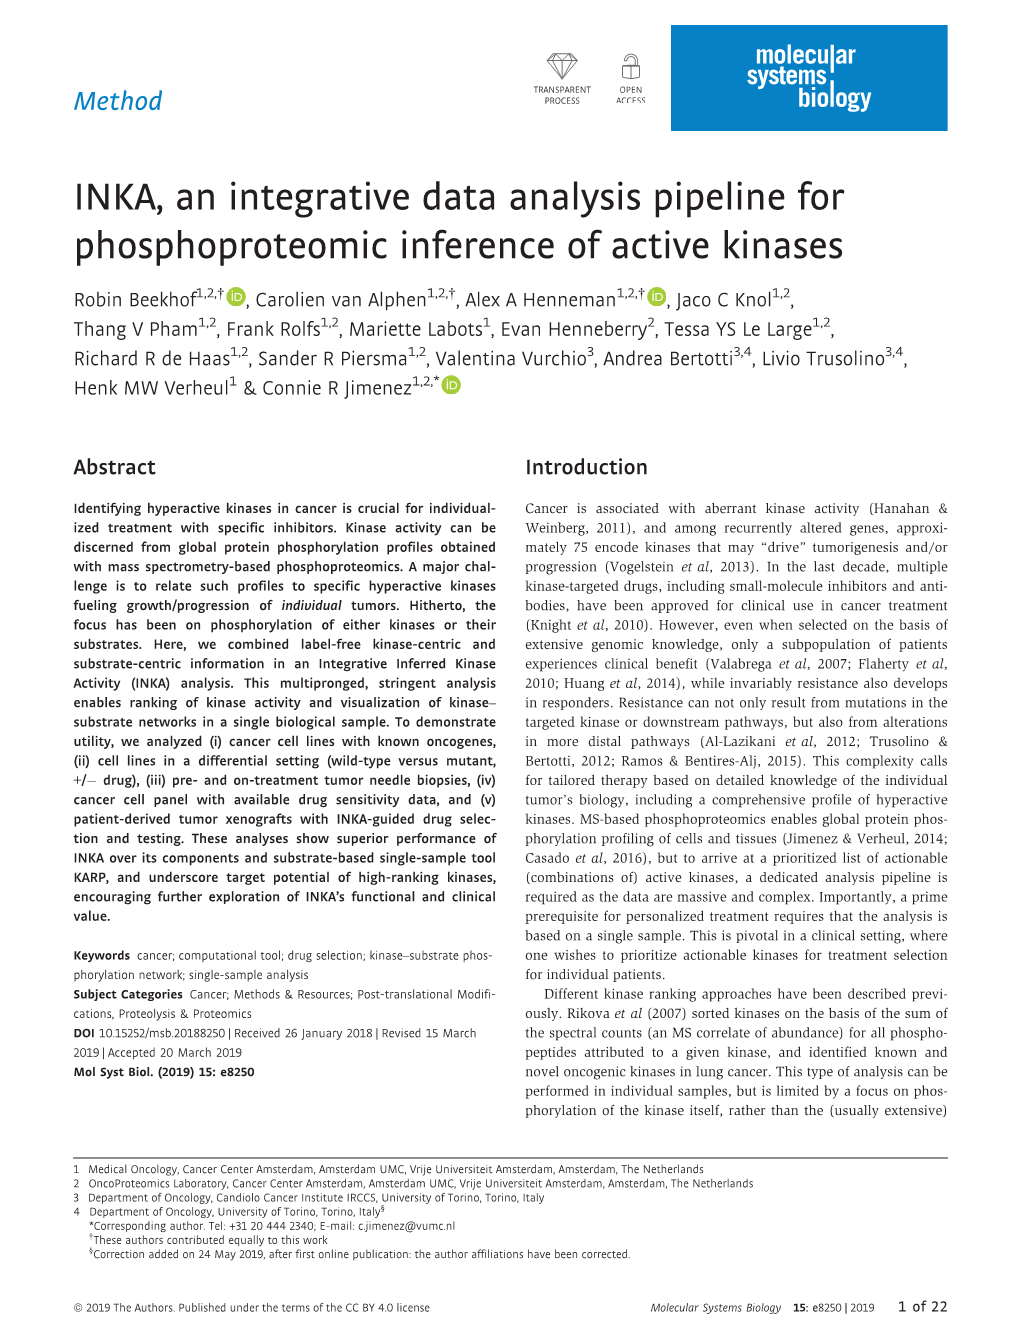 INKA, an Integrative Data Analysis Pipeline for Phosphoproteomic Inference of Active Kinases